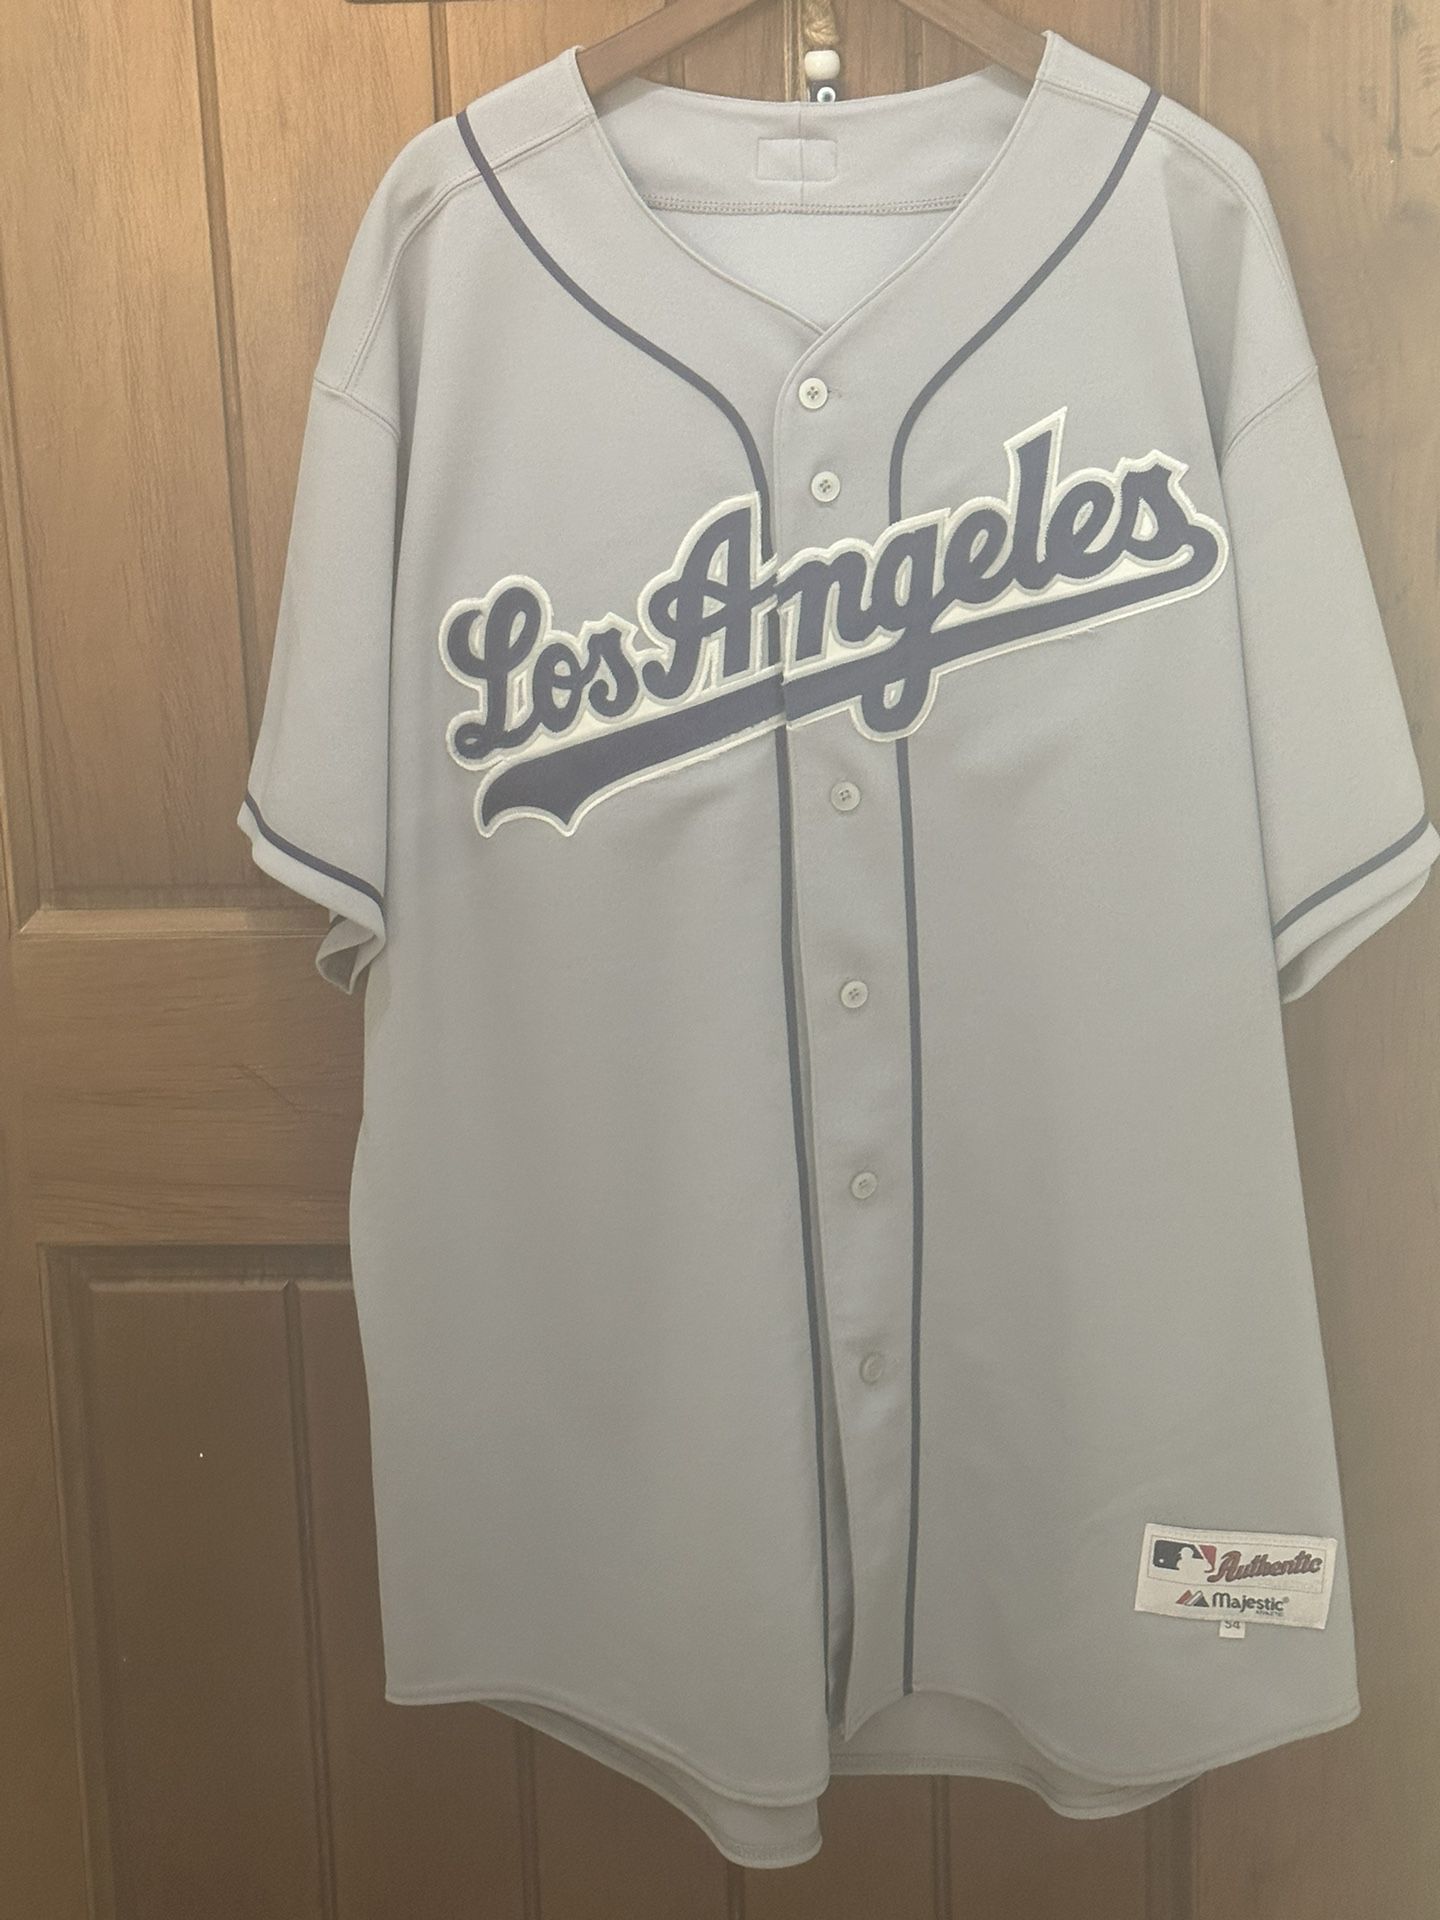 Los Dodgers City Connect Jersey Size XXL 2XL for Sale in Los Angeles, CA -  OfferUp